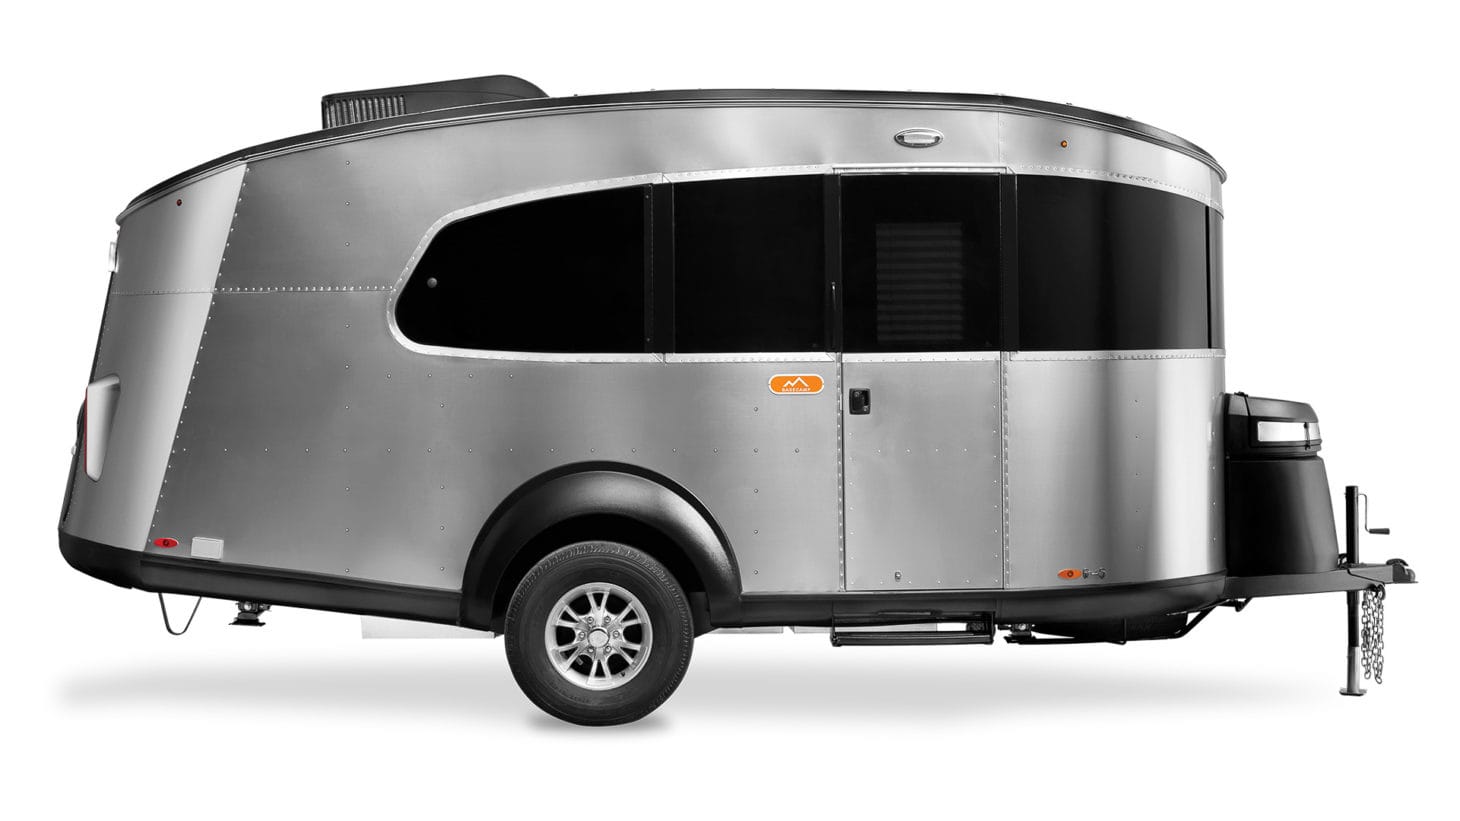 A product photo of the Airstream Basecamp set on a white background